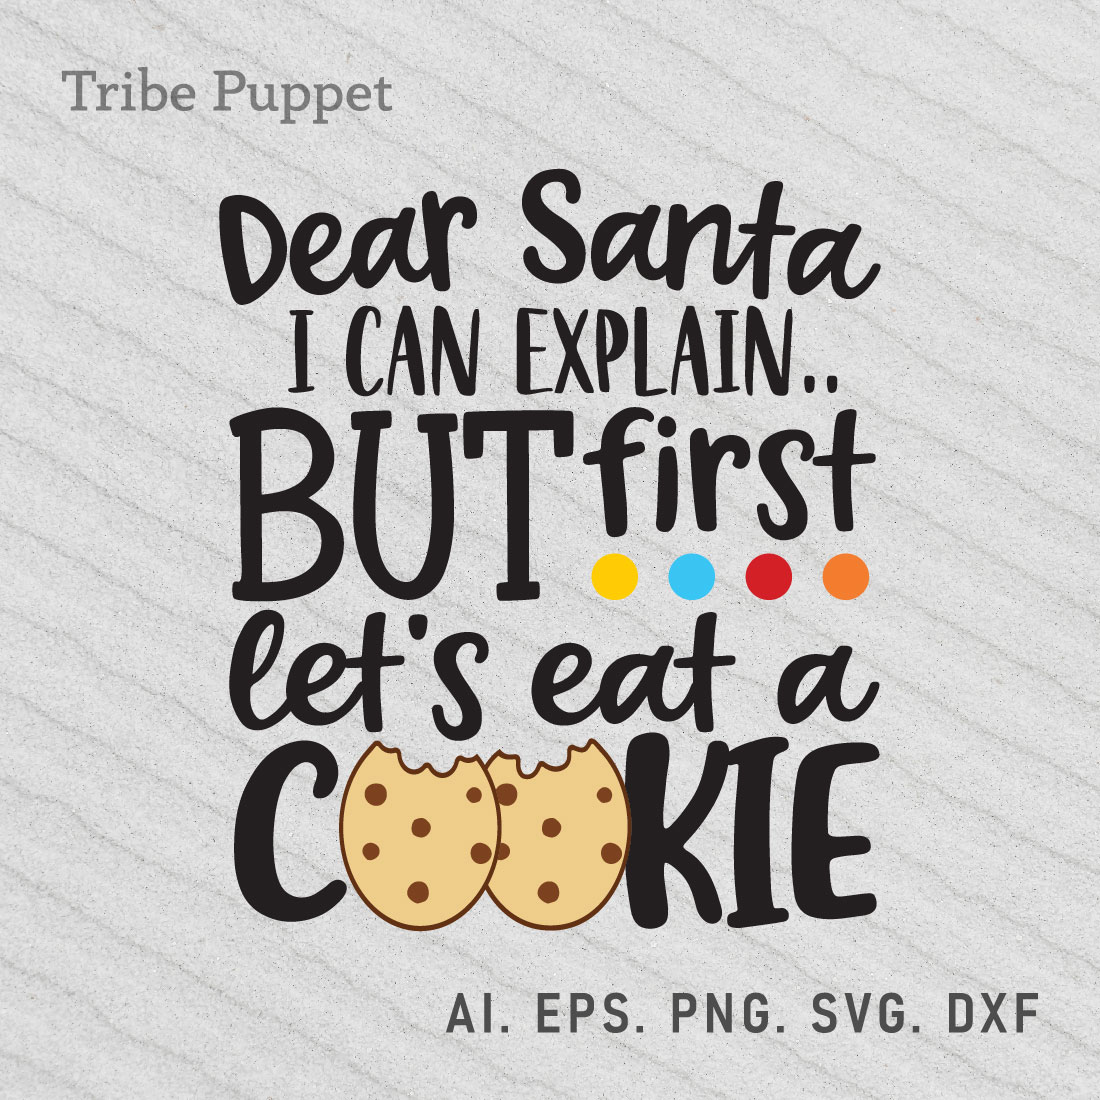 Cookie saying saying dear santa i can explain but it's eat a cookie.